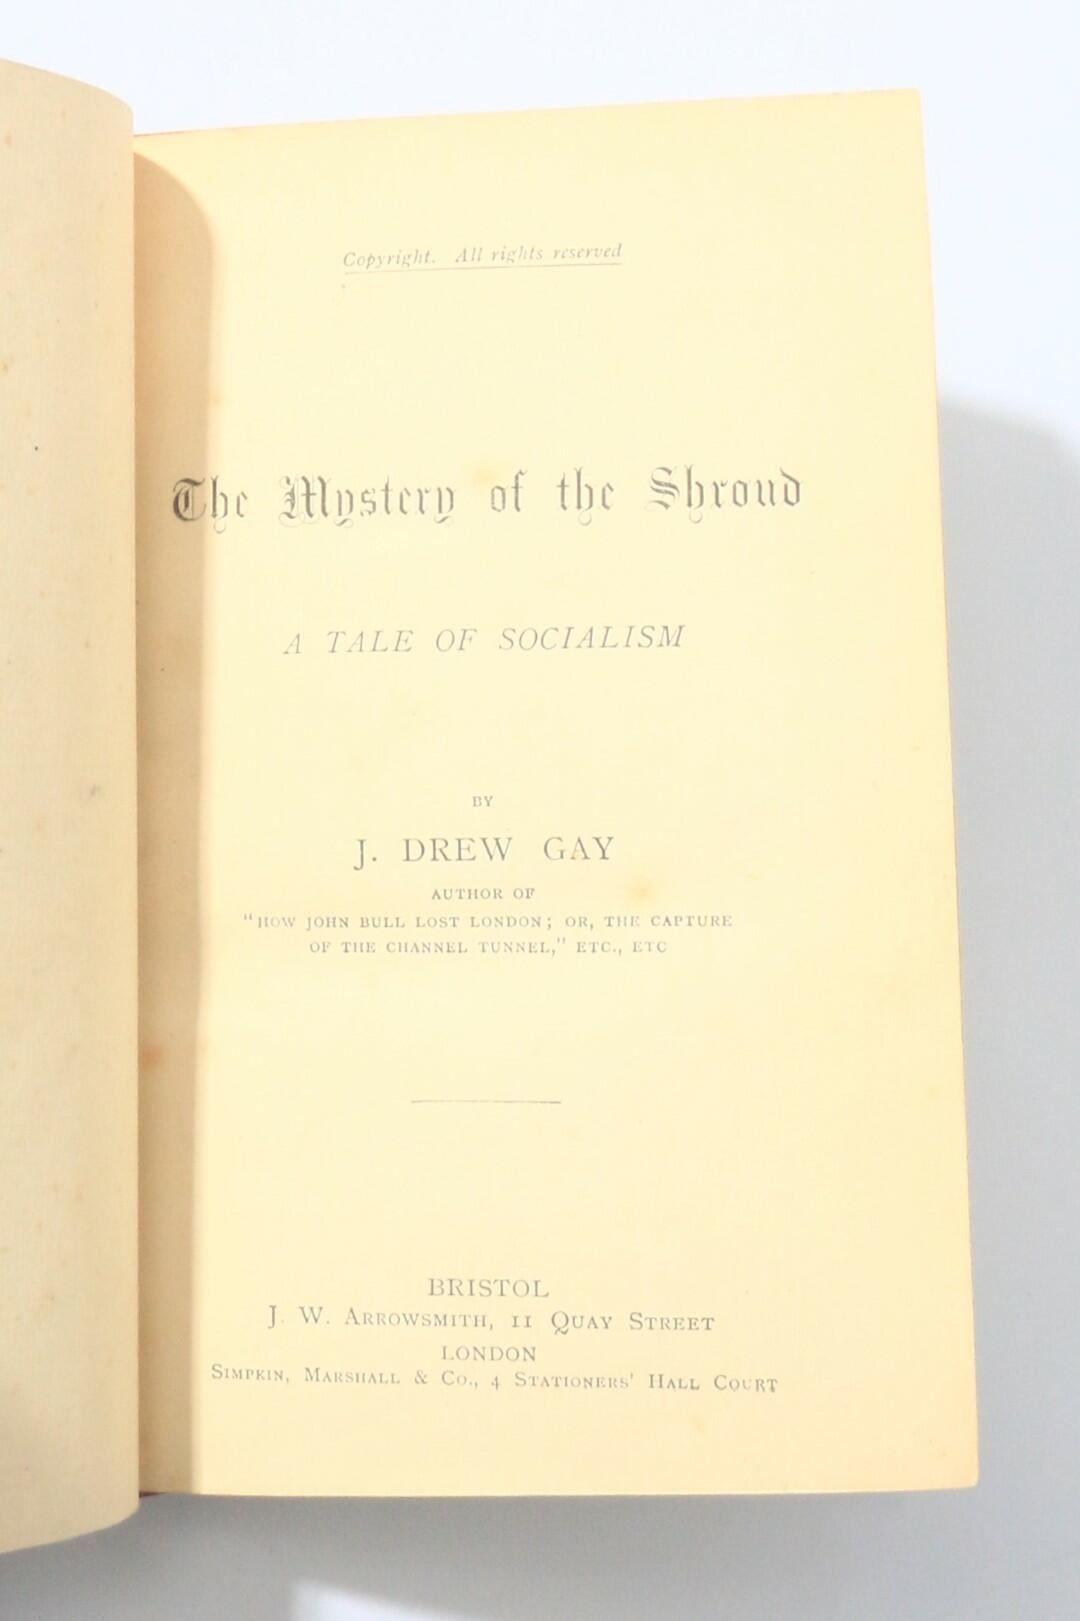 J. Drew Gay [Edgar Luderne Welch] - The Mystery of the Shroud: A Tale of Socialism - J.W. Arrowsmith & Simpkin, Marshall and Co., nd [1887], First Edition.